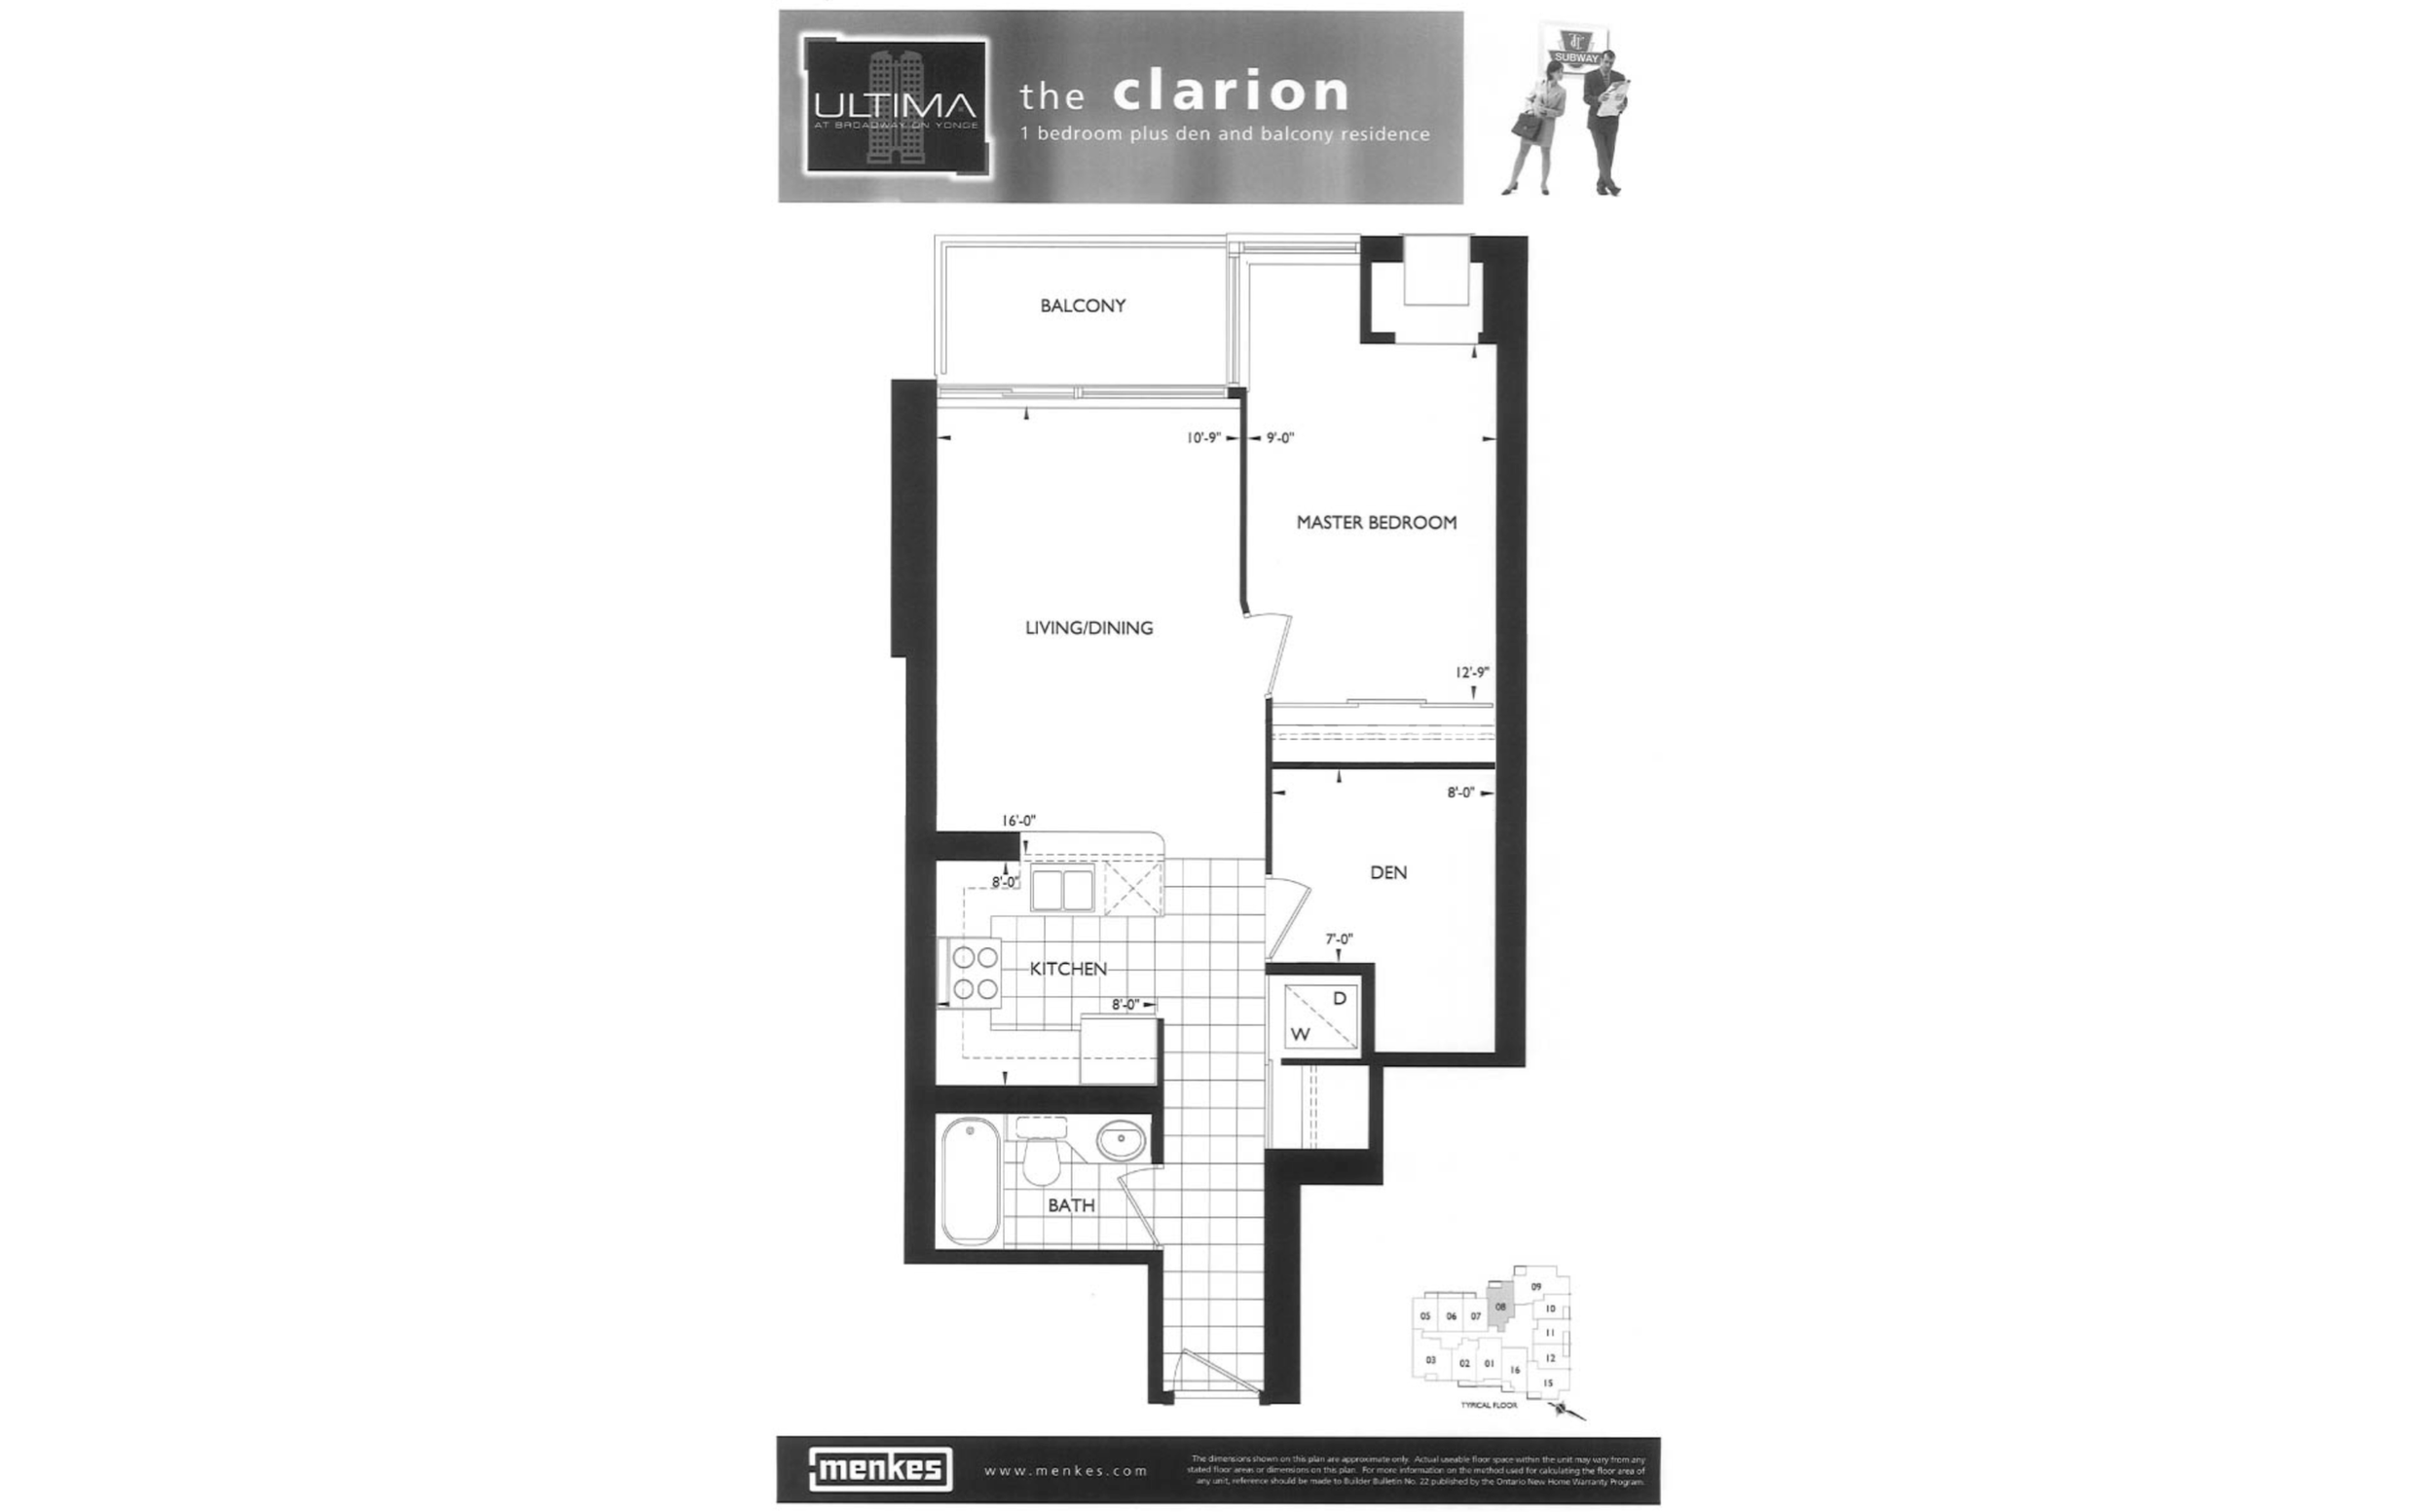 21 - The Clarion Floor Plan.png